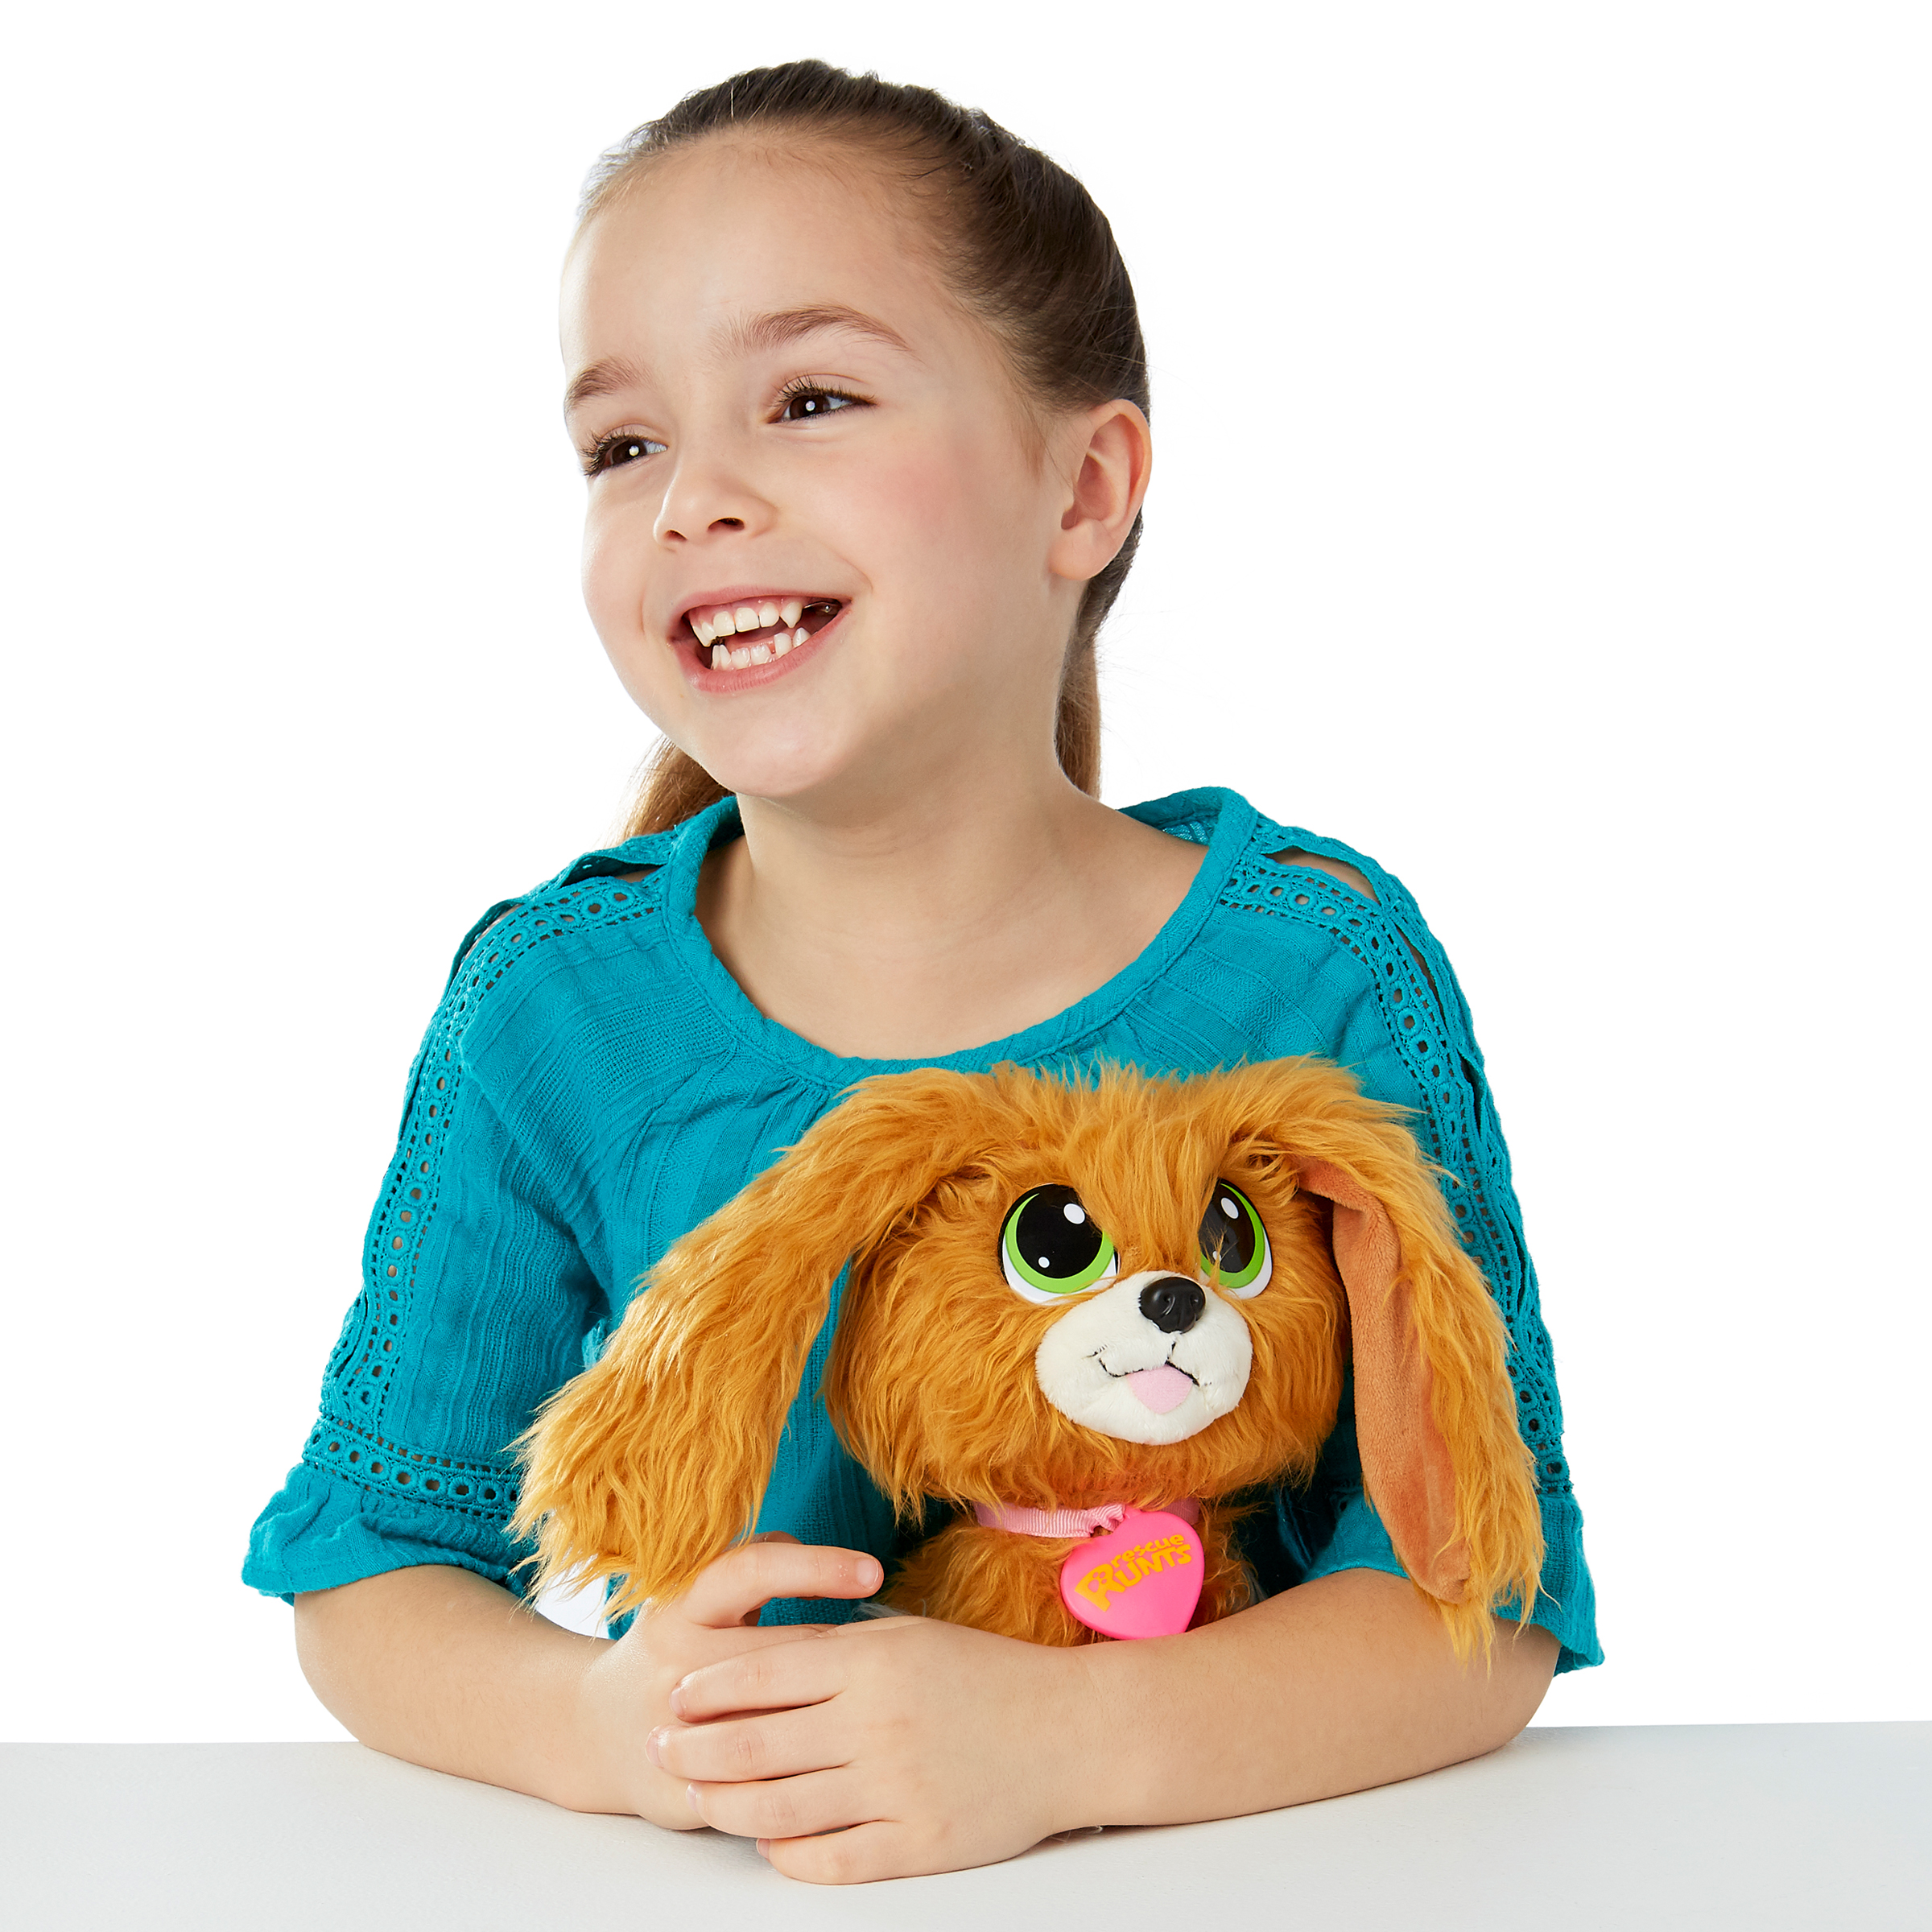 Rescue runts - spaniel - rescue dog plush by kd kids - image 3 of 8